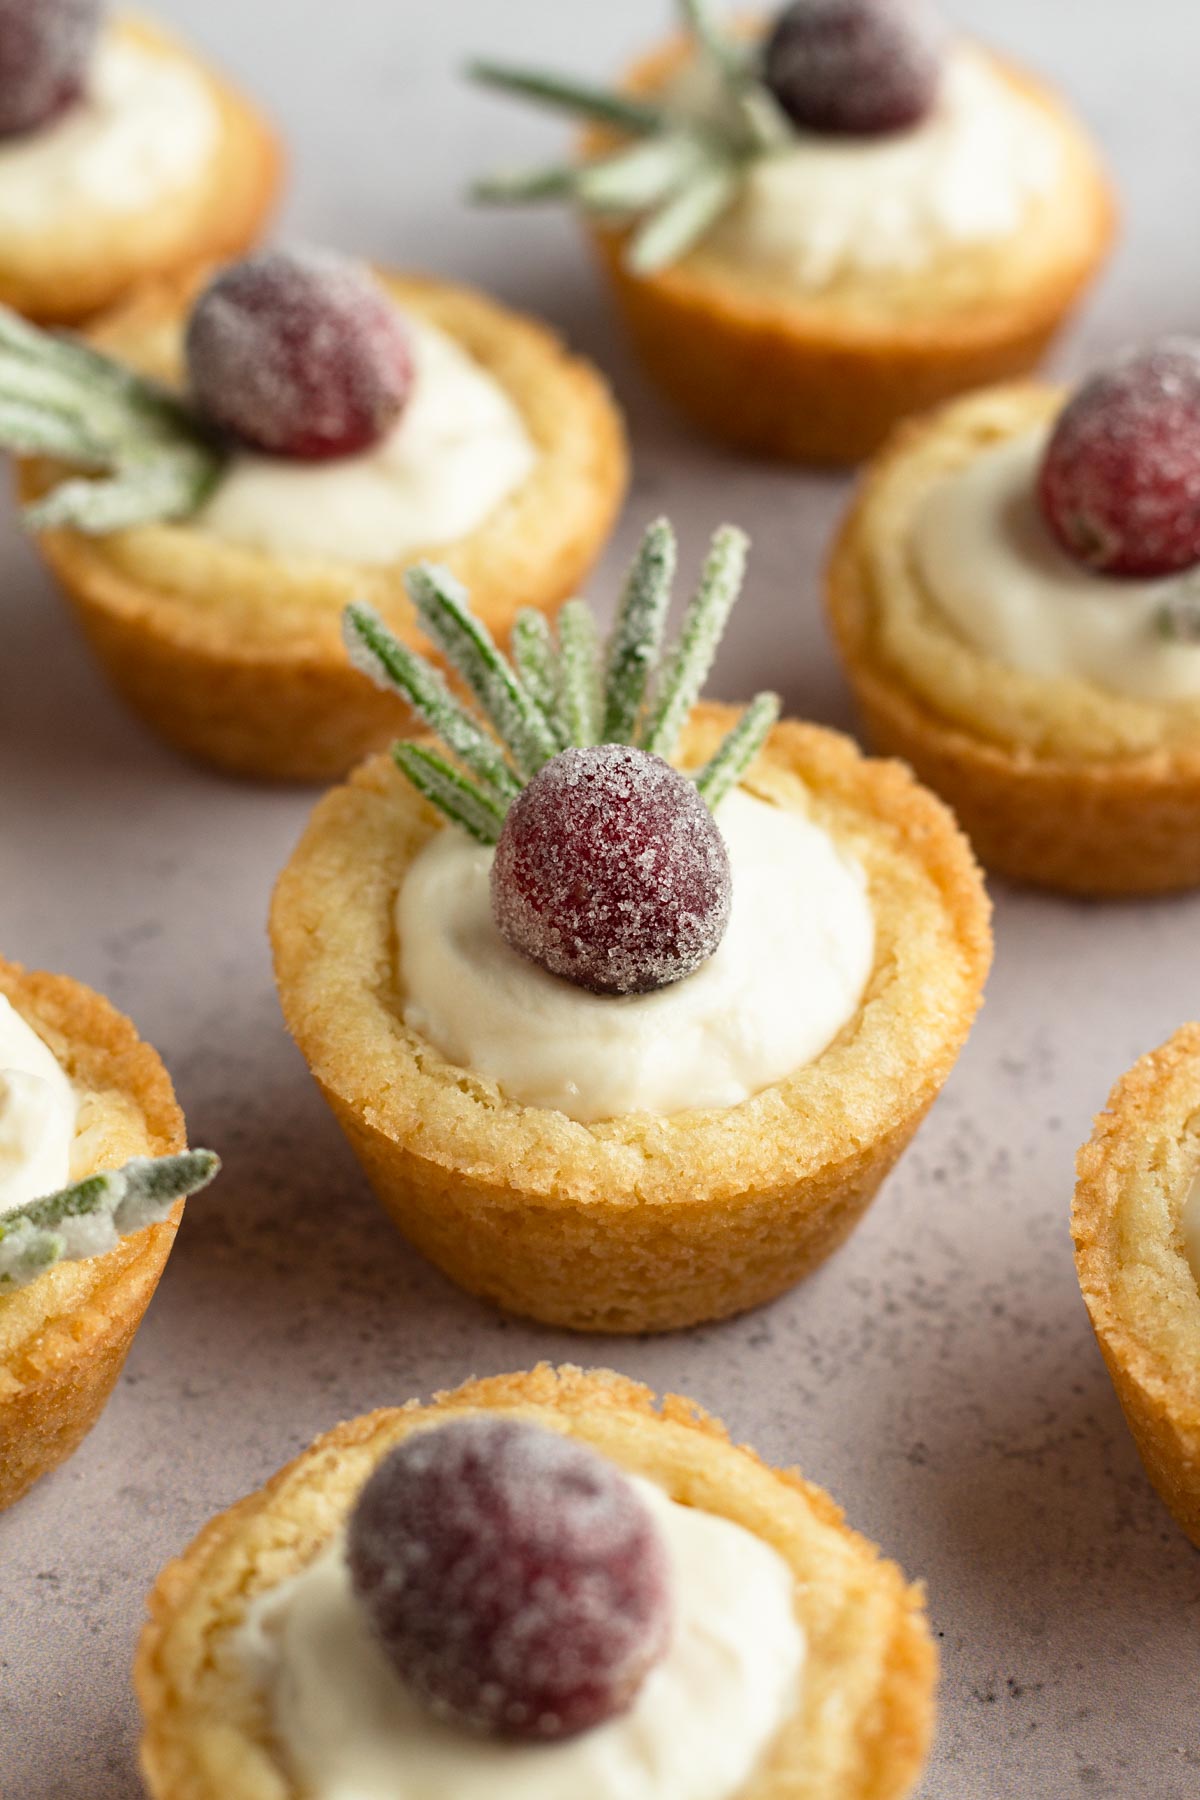 Sugared cranberries and rosemary sprigs on top of mini fruit tarts.